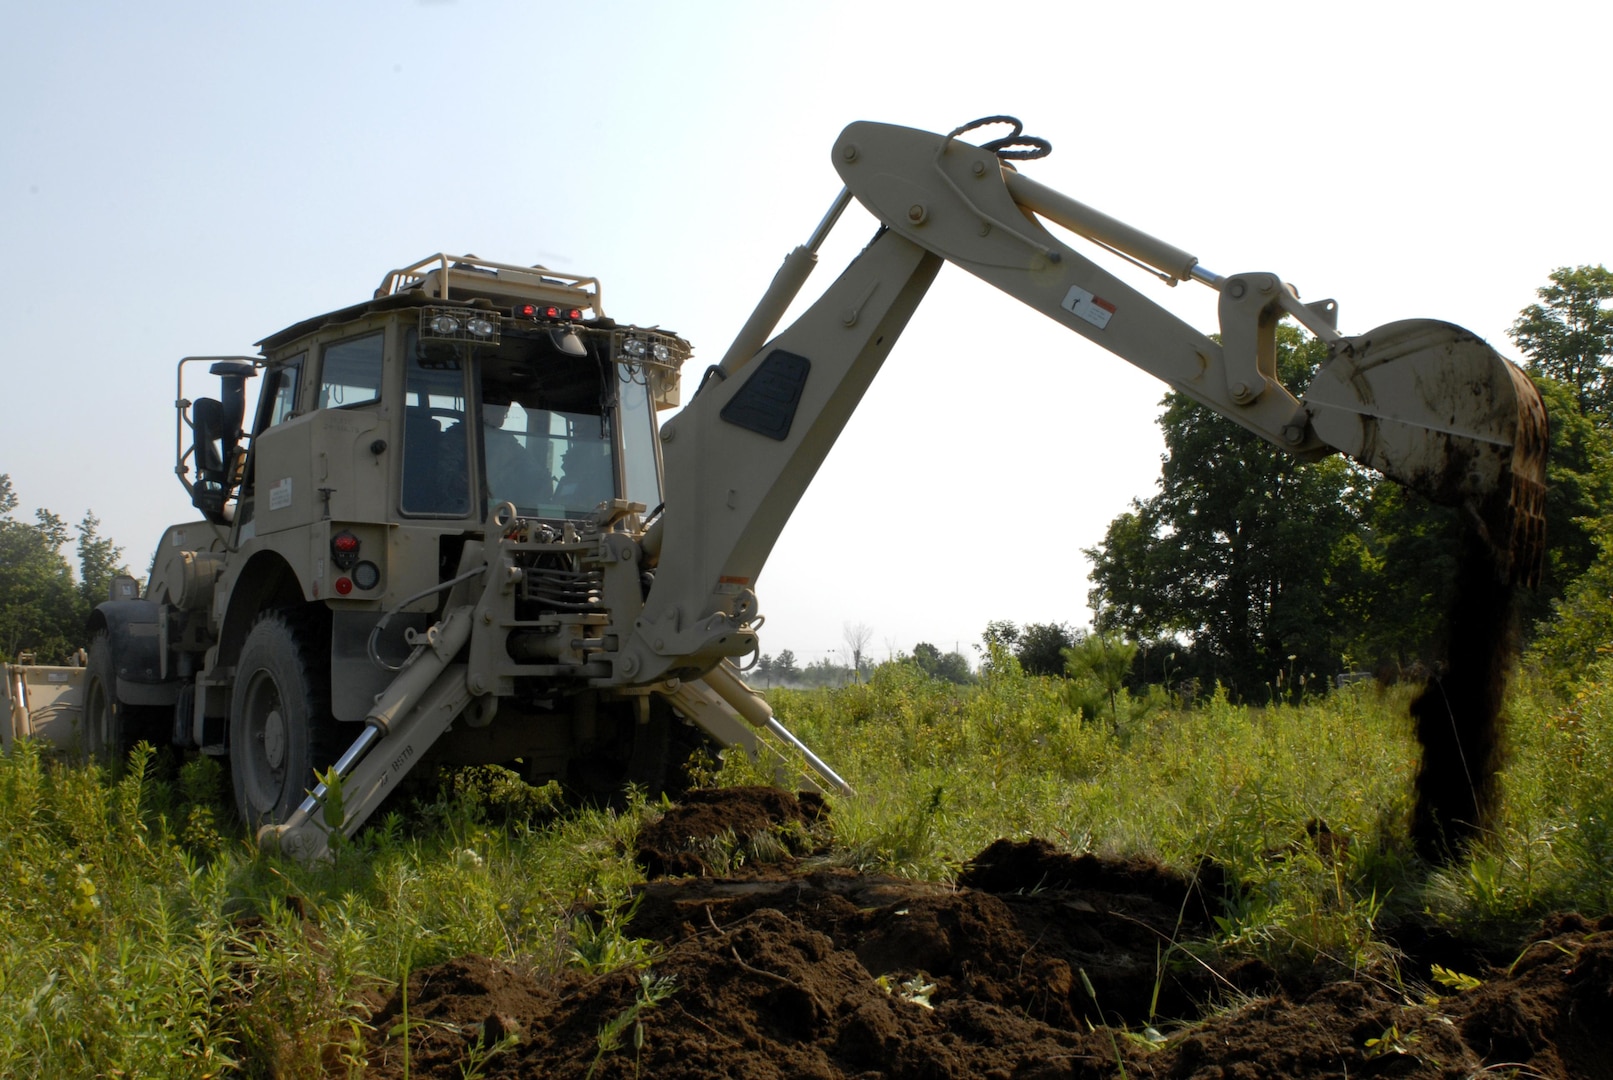 New York Army National Guard Spc. Andrew Paulson, a heavy equipment operator from Amherst, New York, assigned to Company A, 27th Brigade Special Troops Battalion,  operates a High Mobility Engineer Excavator (HMEE) to construct a fighting position during the 27th Infantry Brigade Combat Team Exportable Combat Training Capability (XCTC) exercise at Fort Drum on July 13, 2015. 